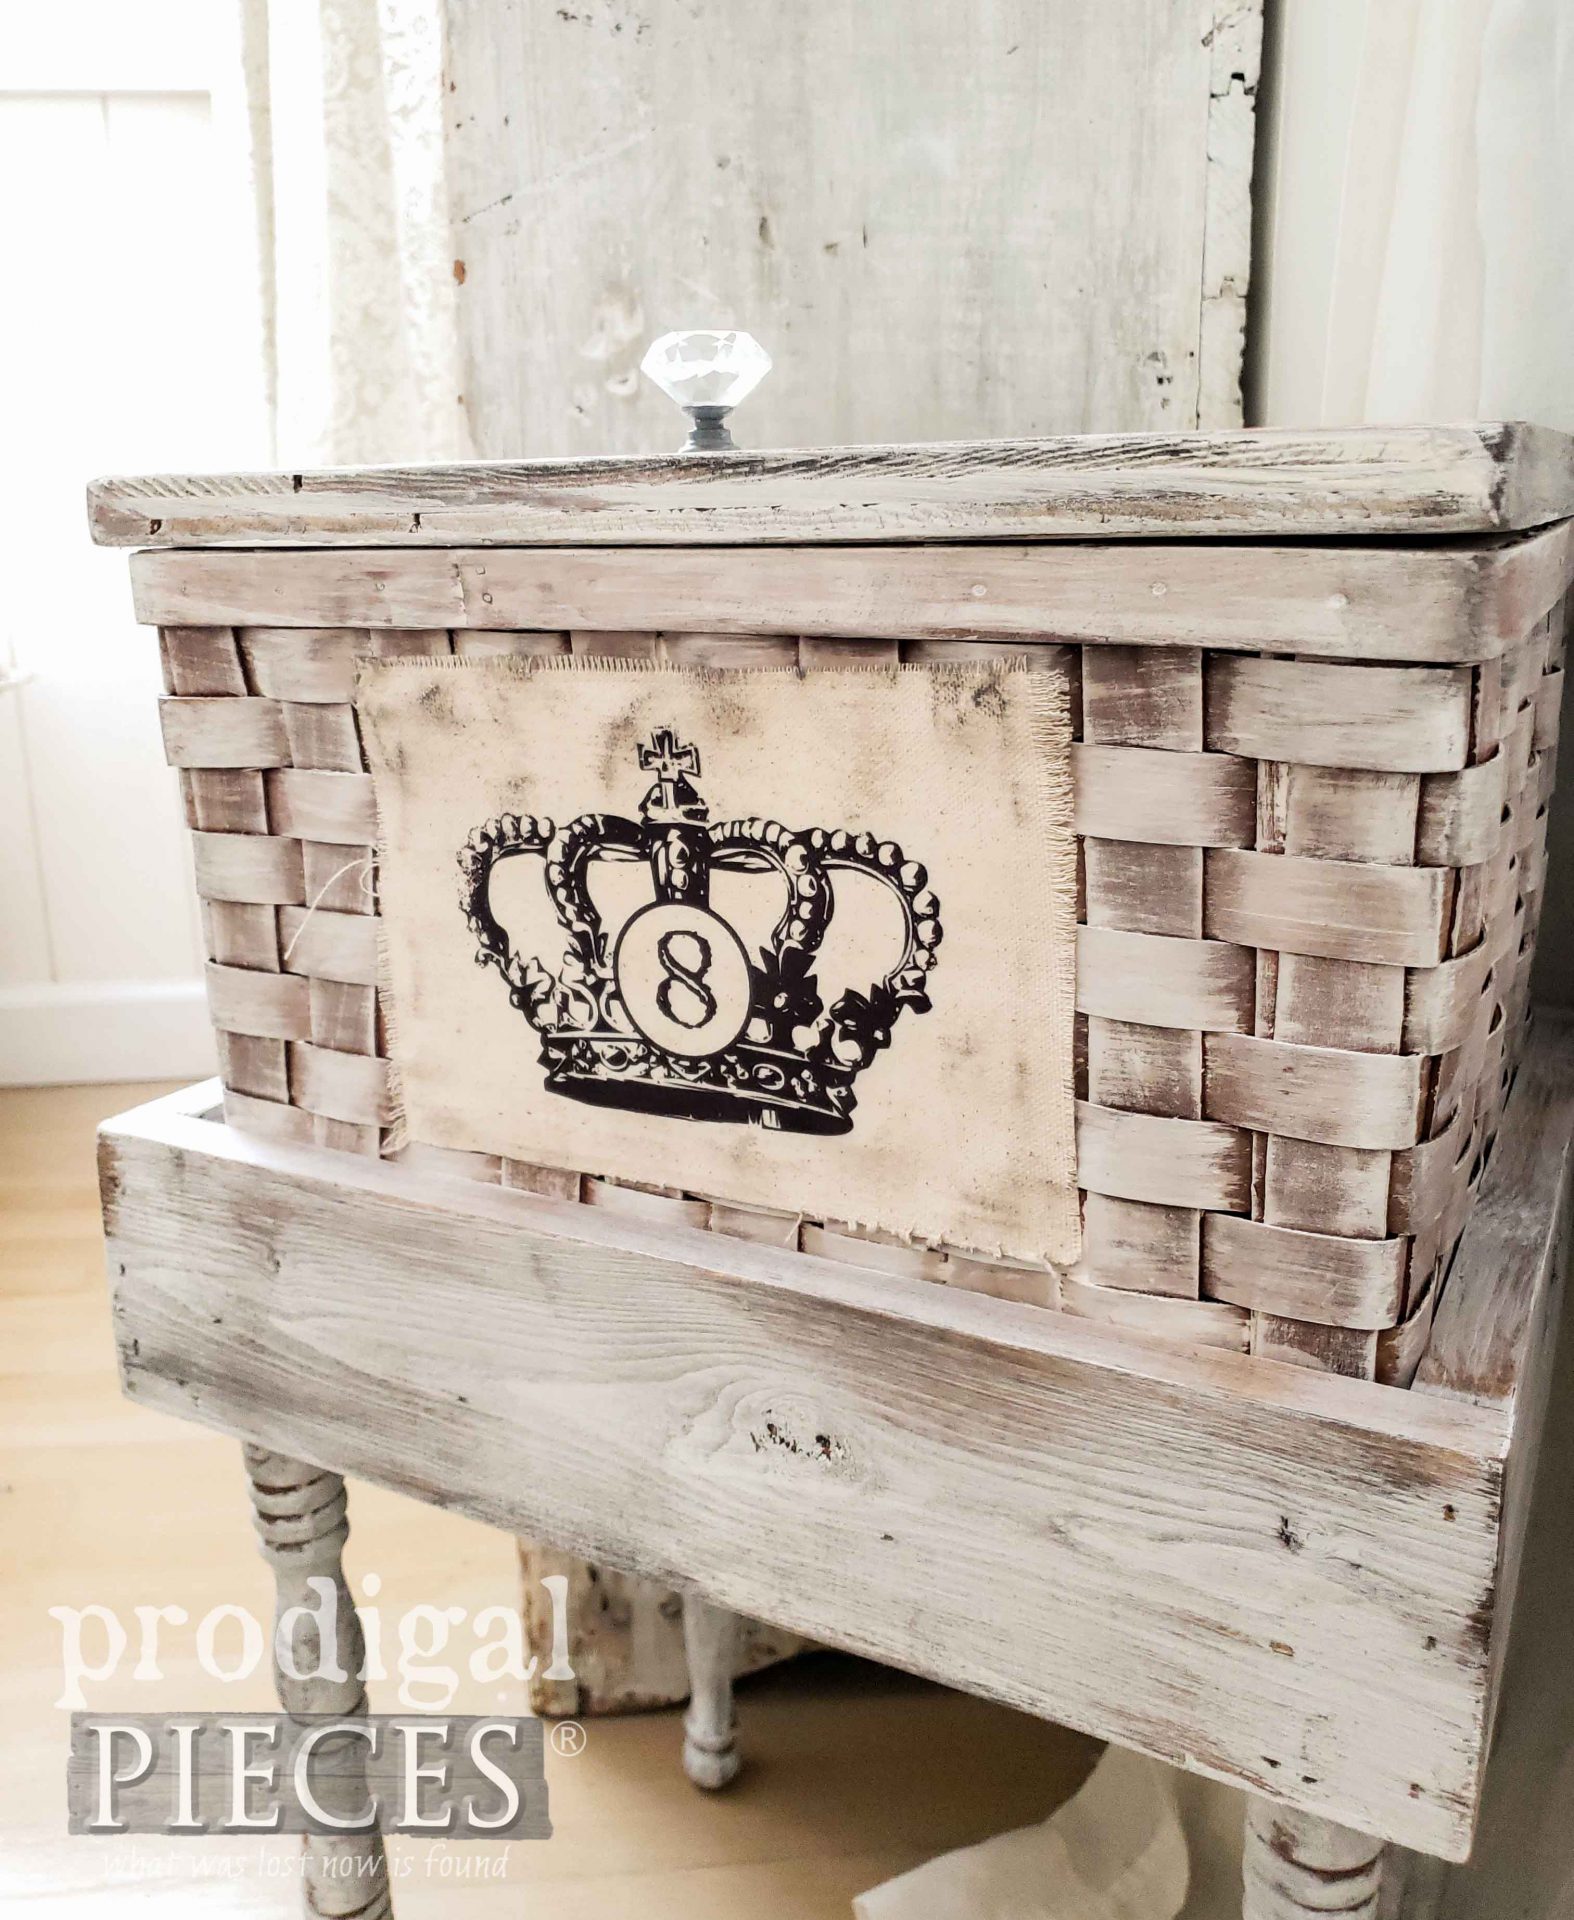 Rustic Chic French Chic Basket Table by Larissa of Prodigal Pieces | shop.prodigalpieces.com #prodigalpieces #diy #home #homedecor #farmhouse